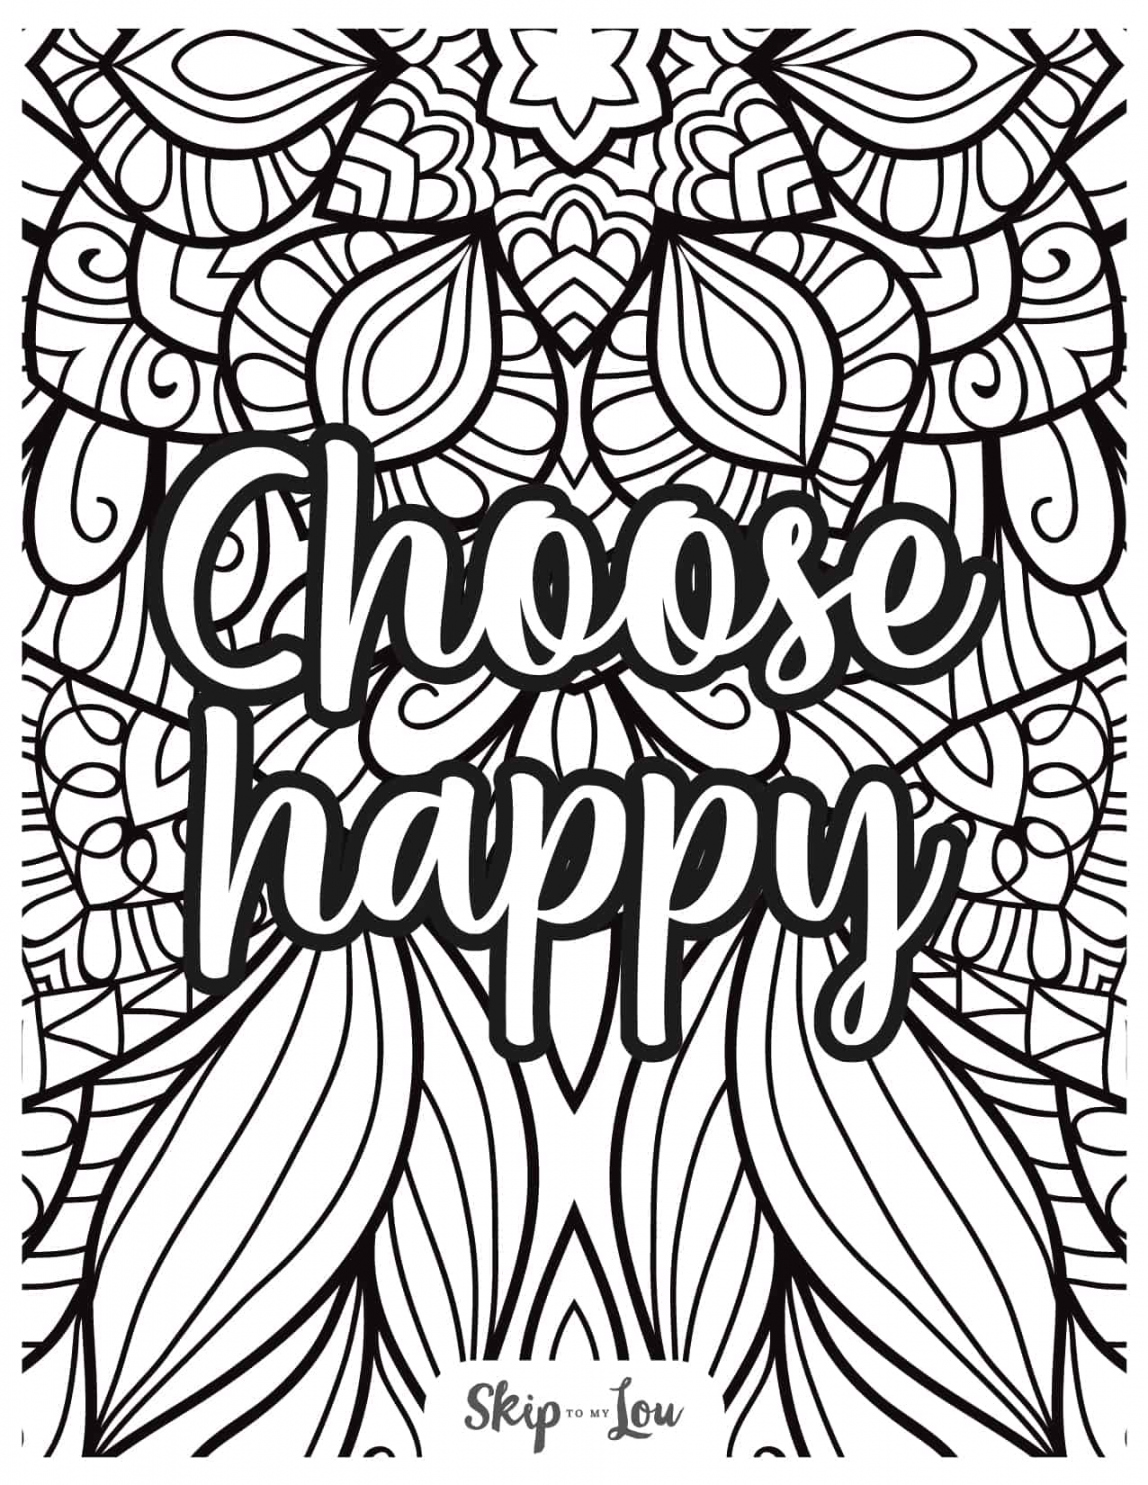 Coloring Pages Free Printable - Printable - Free Coloring Pages For Adults  Skip To My Lou